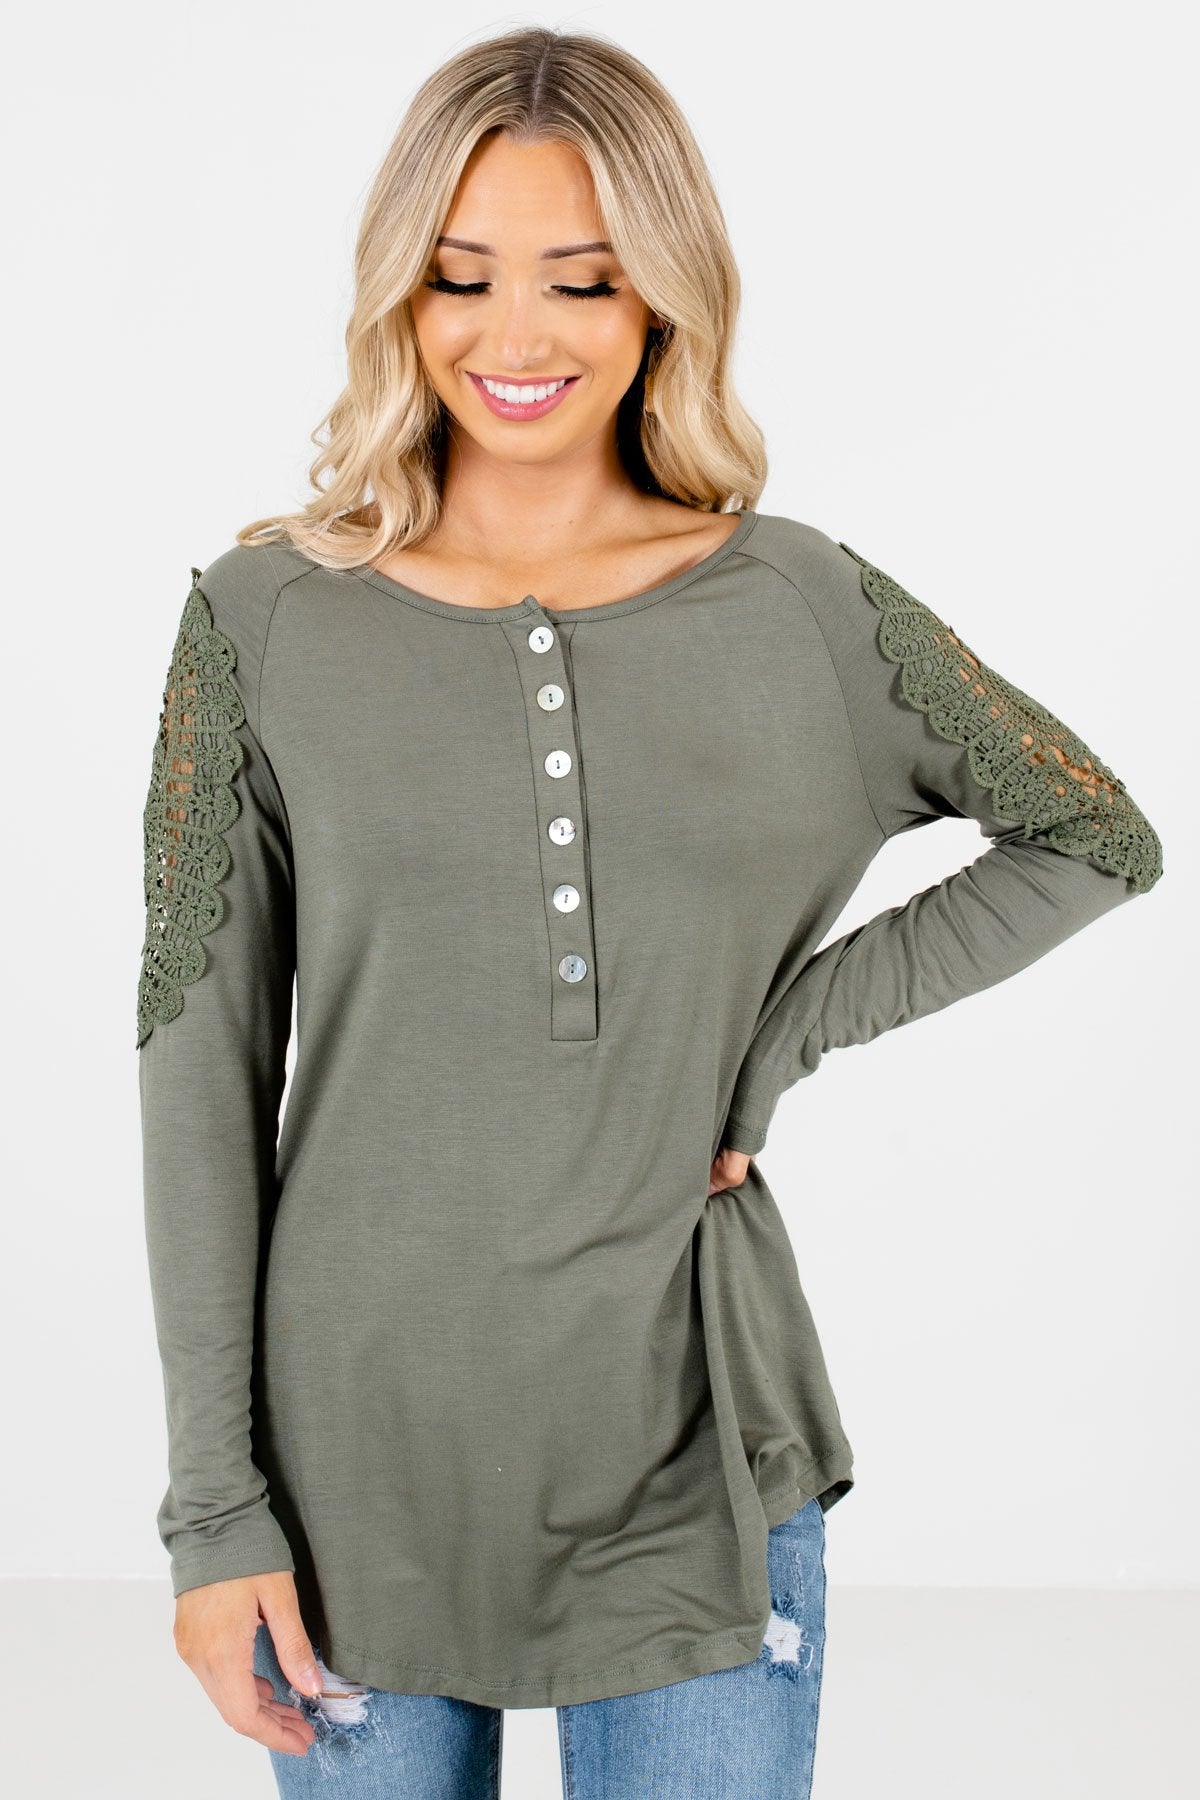 Women’s Light Olive Green Long Sleeve Boutique Tops